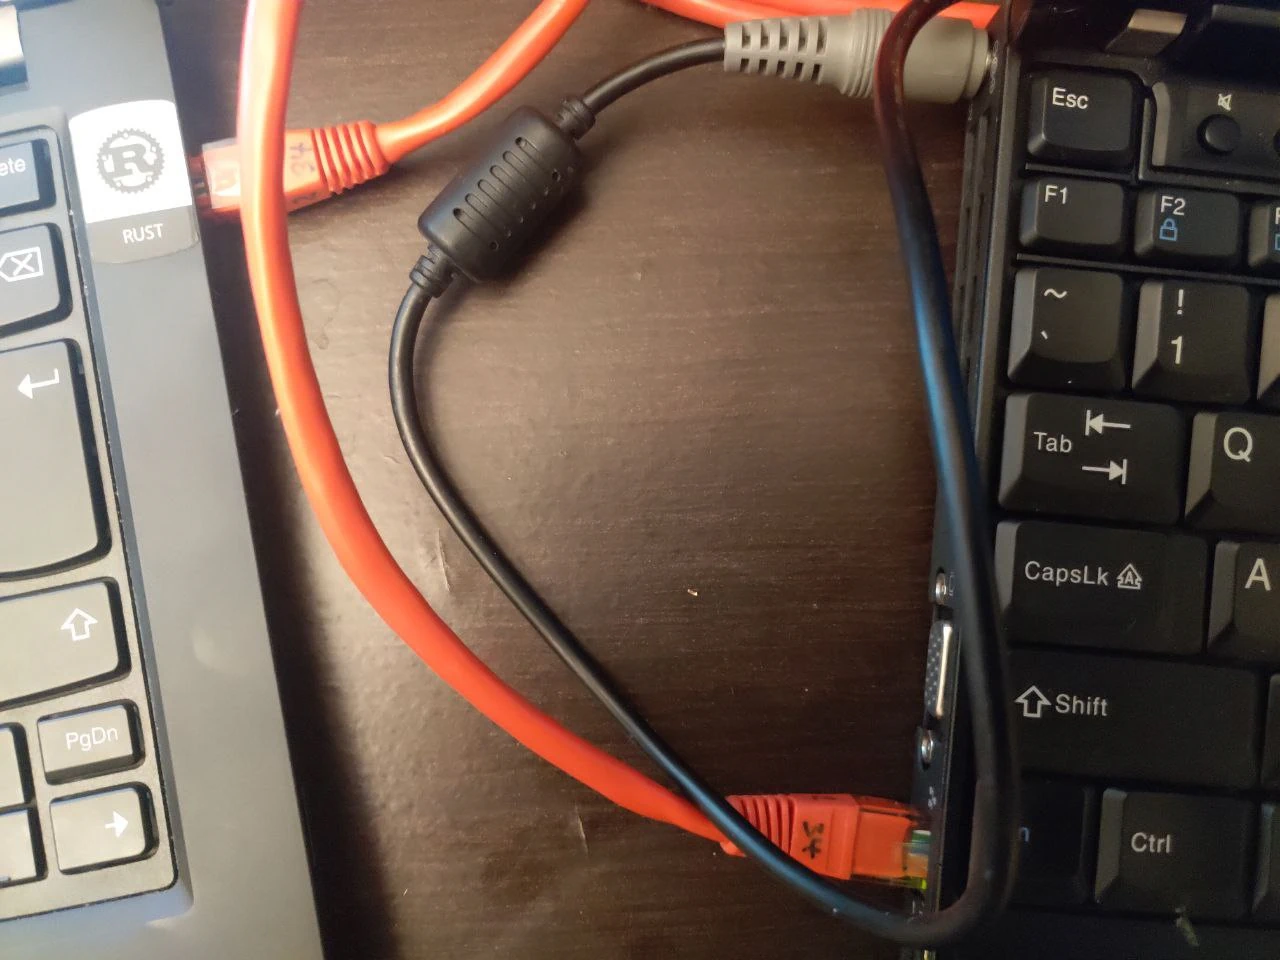 Two thinkpads connected with Ethernet